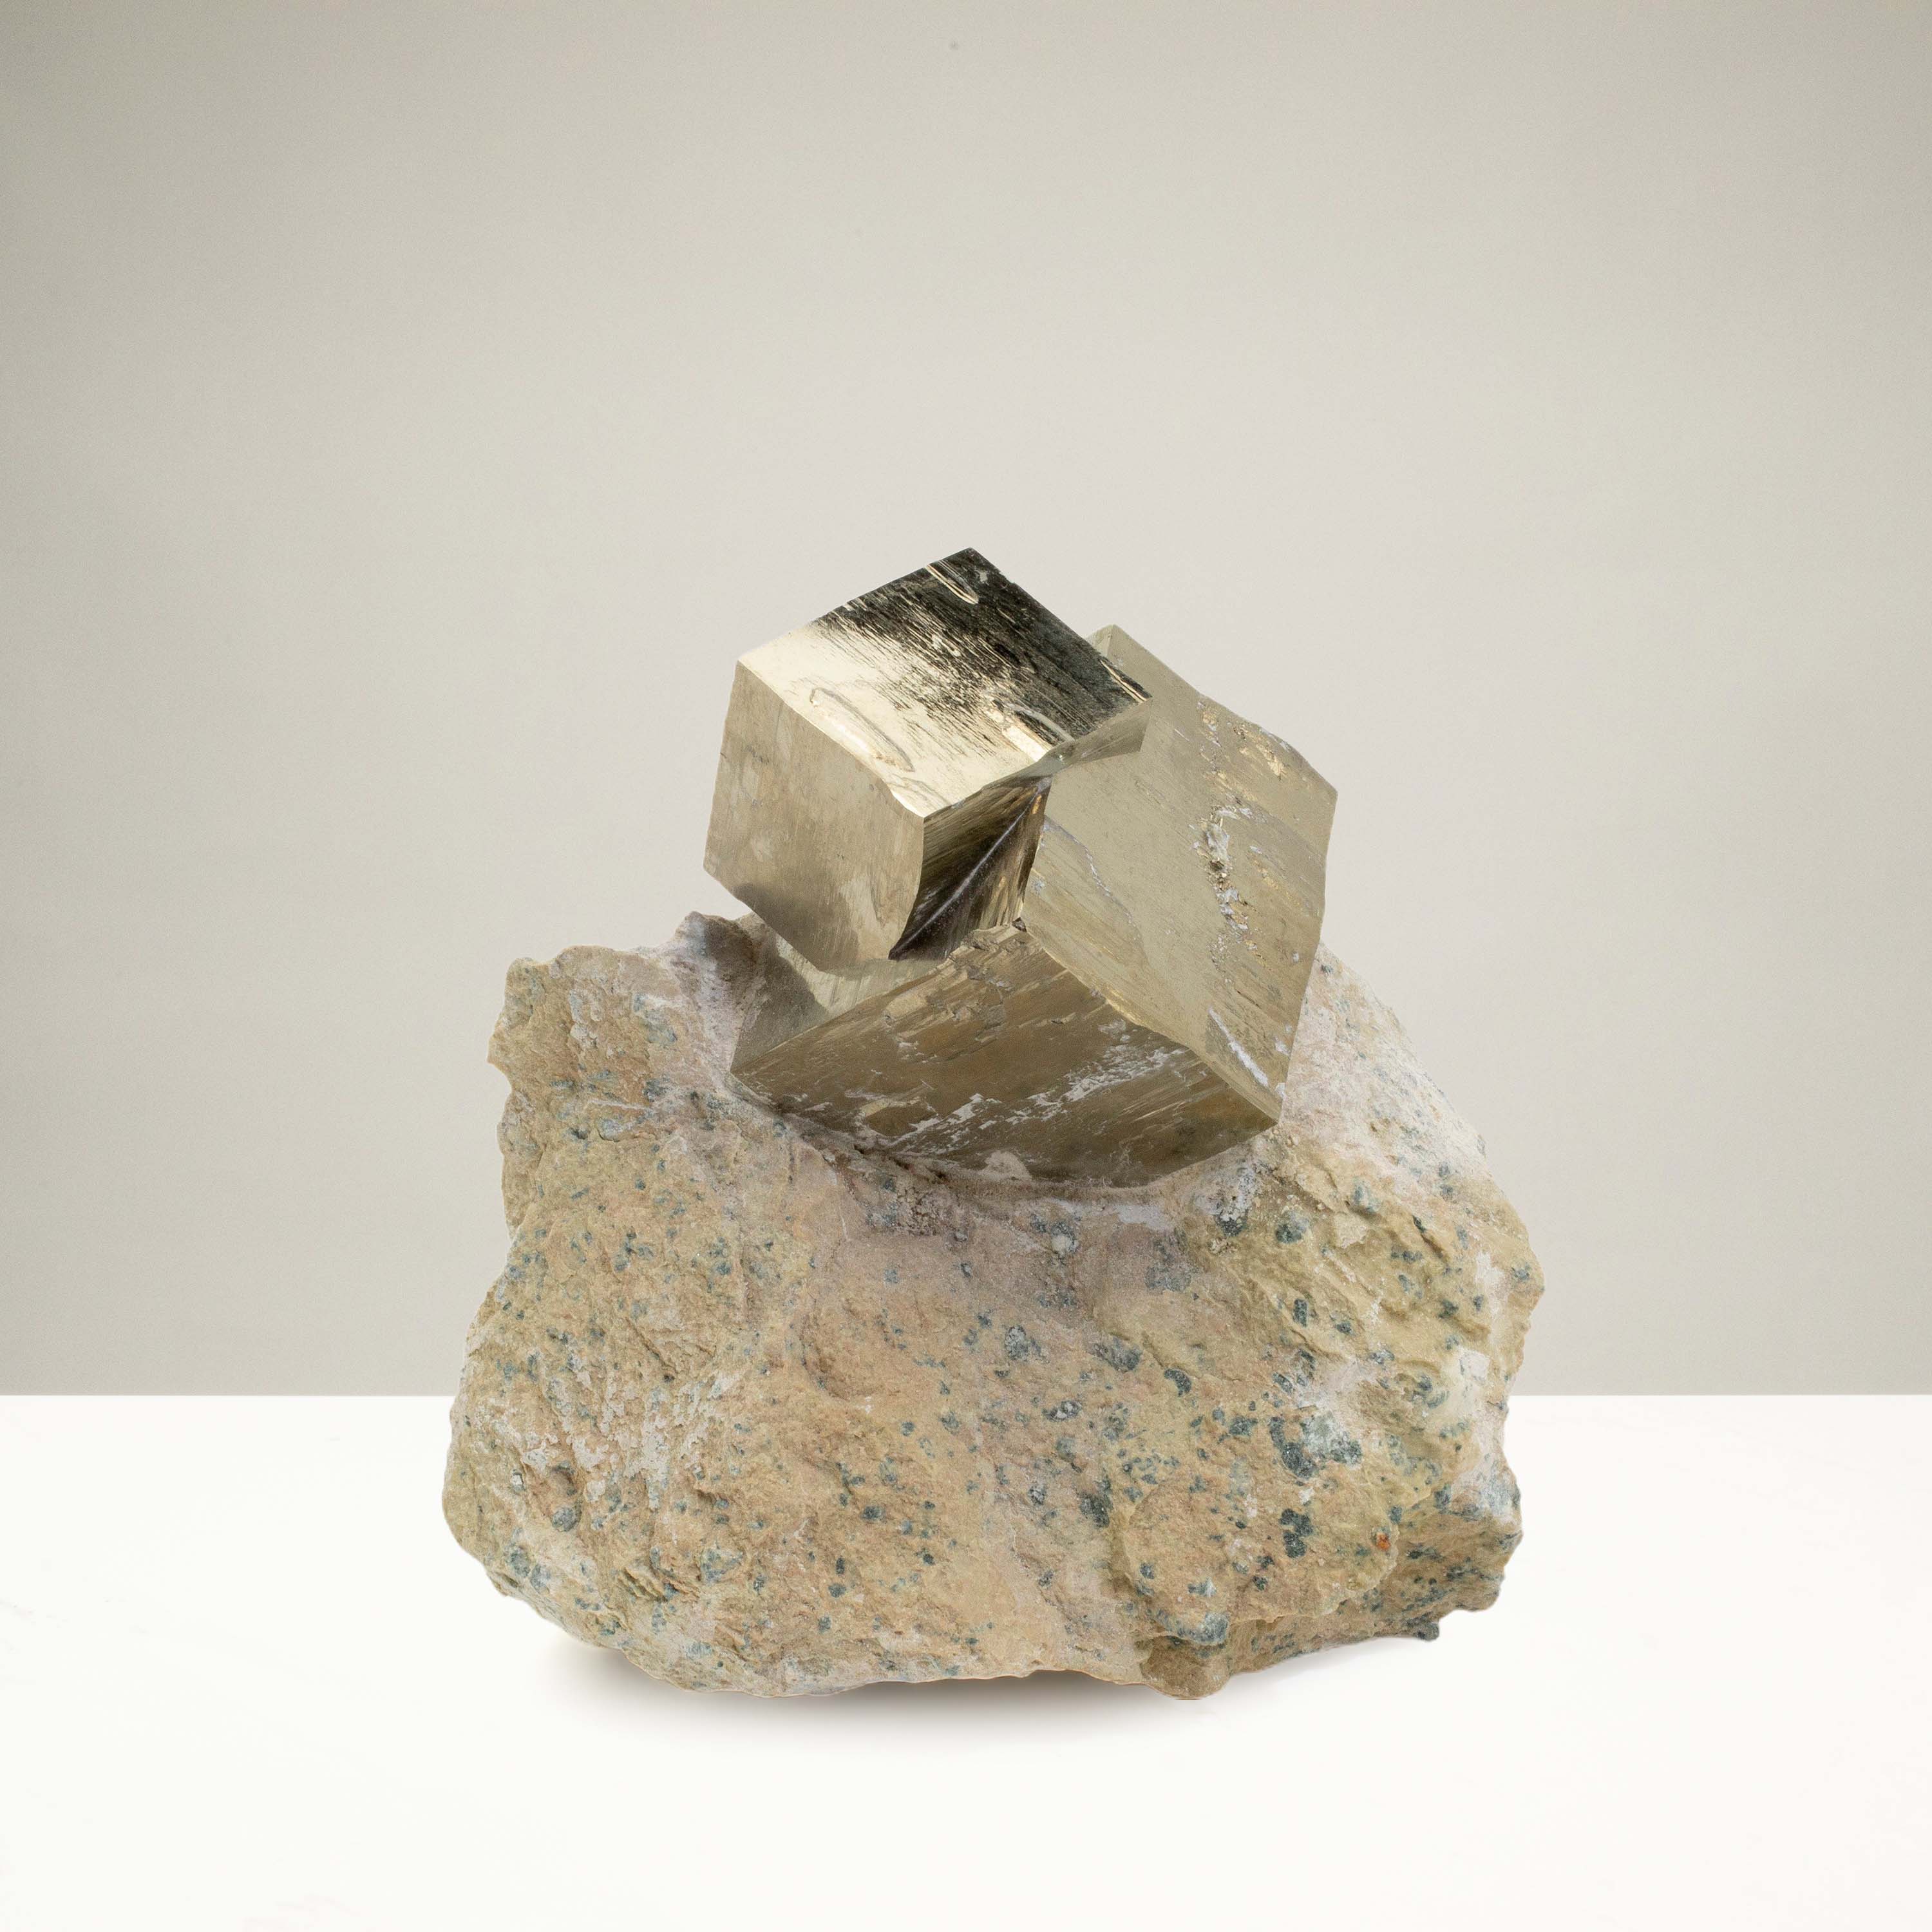 Kalifano Pyrite Natural Pyrite Cube Cluster in Matrix from Spain - 4.5" / 1,025g SPC3600.002